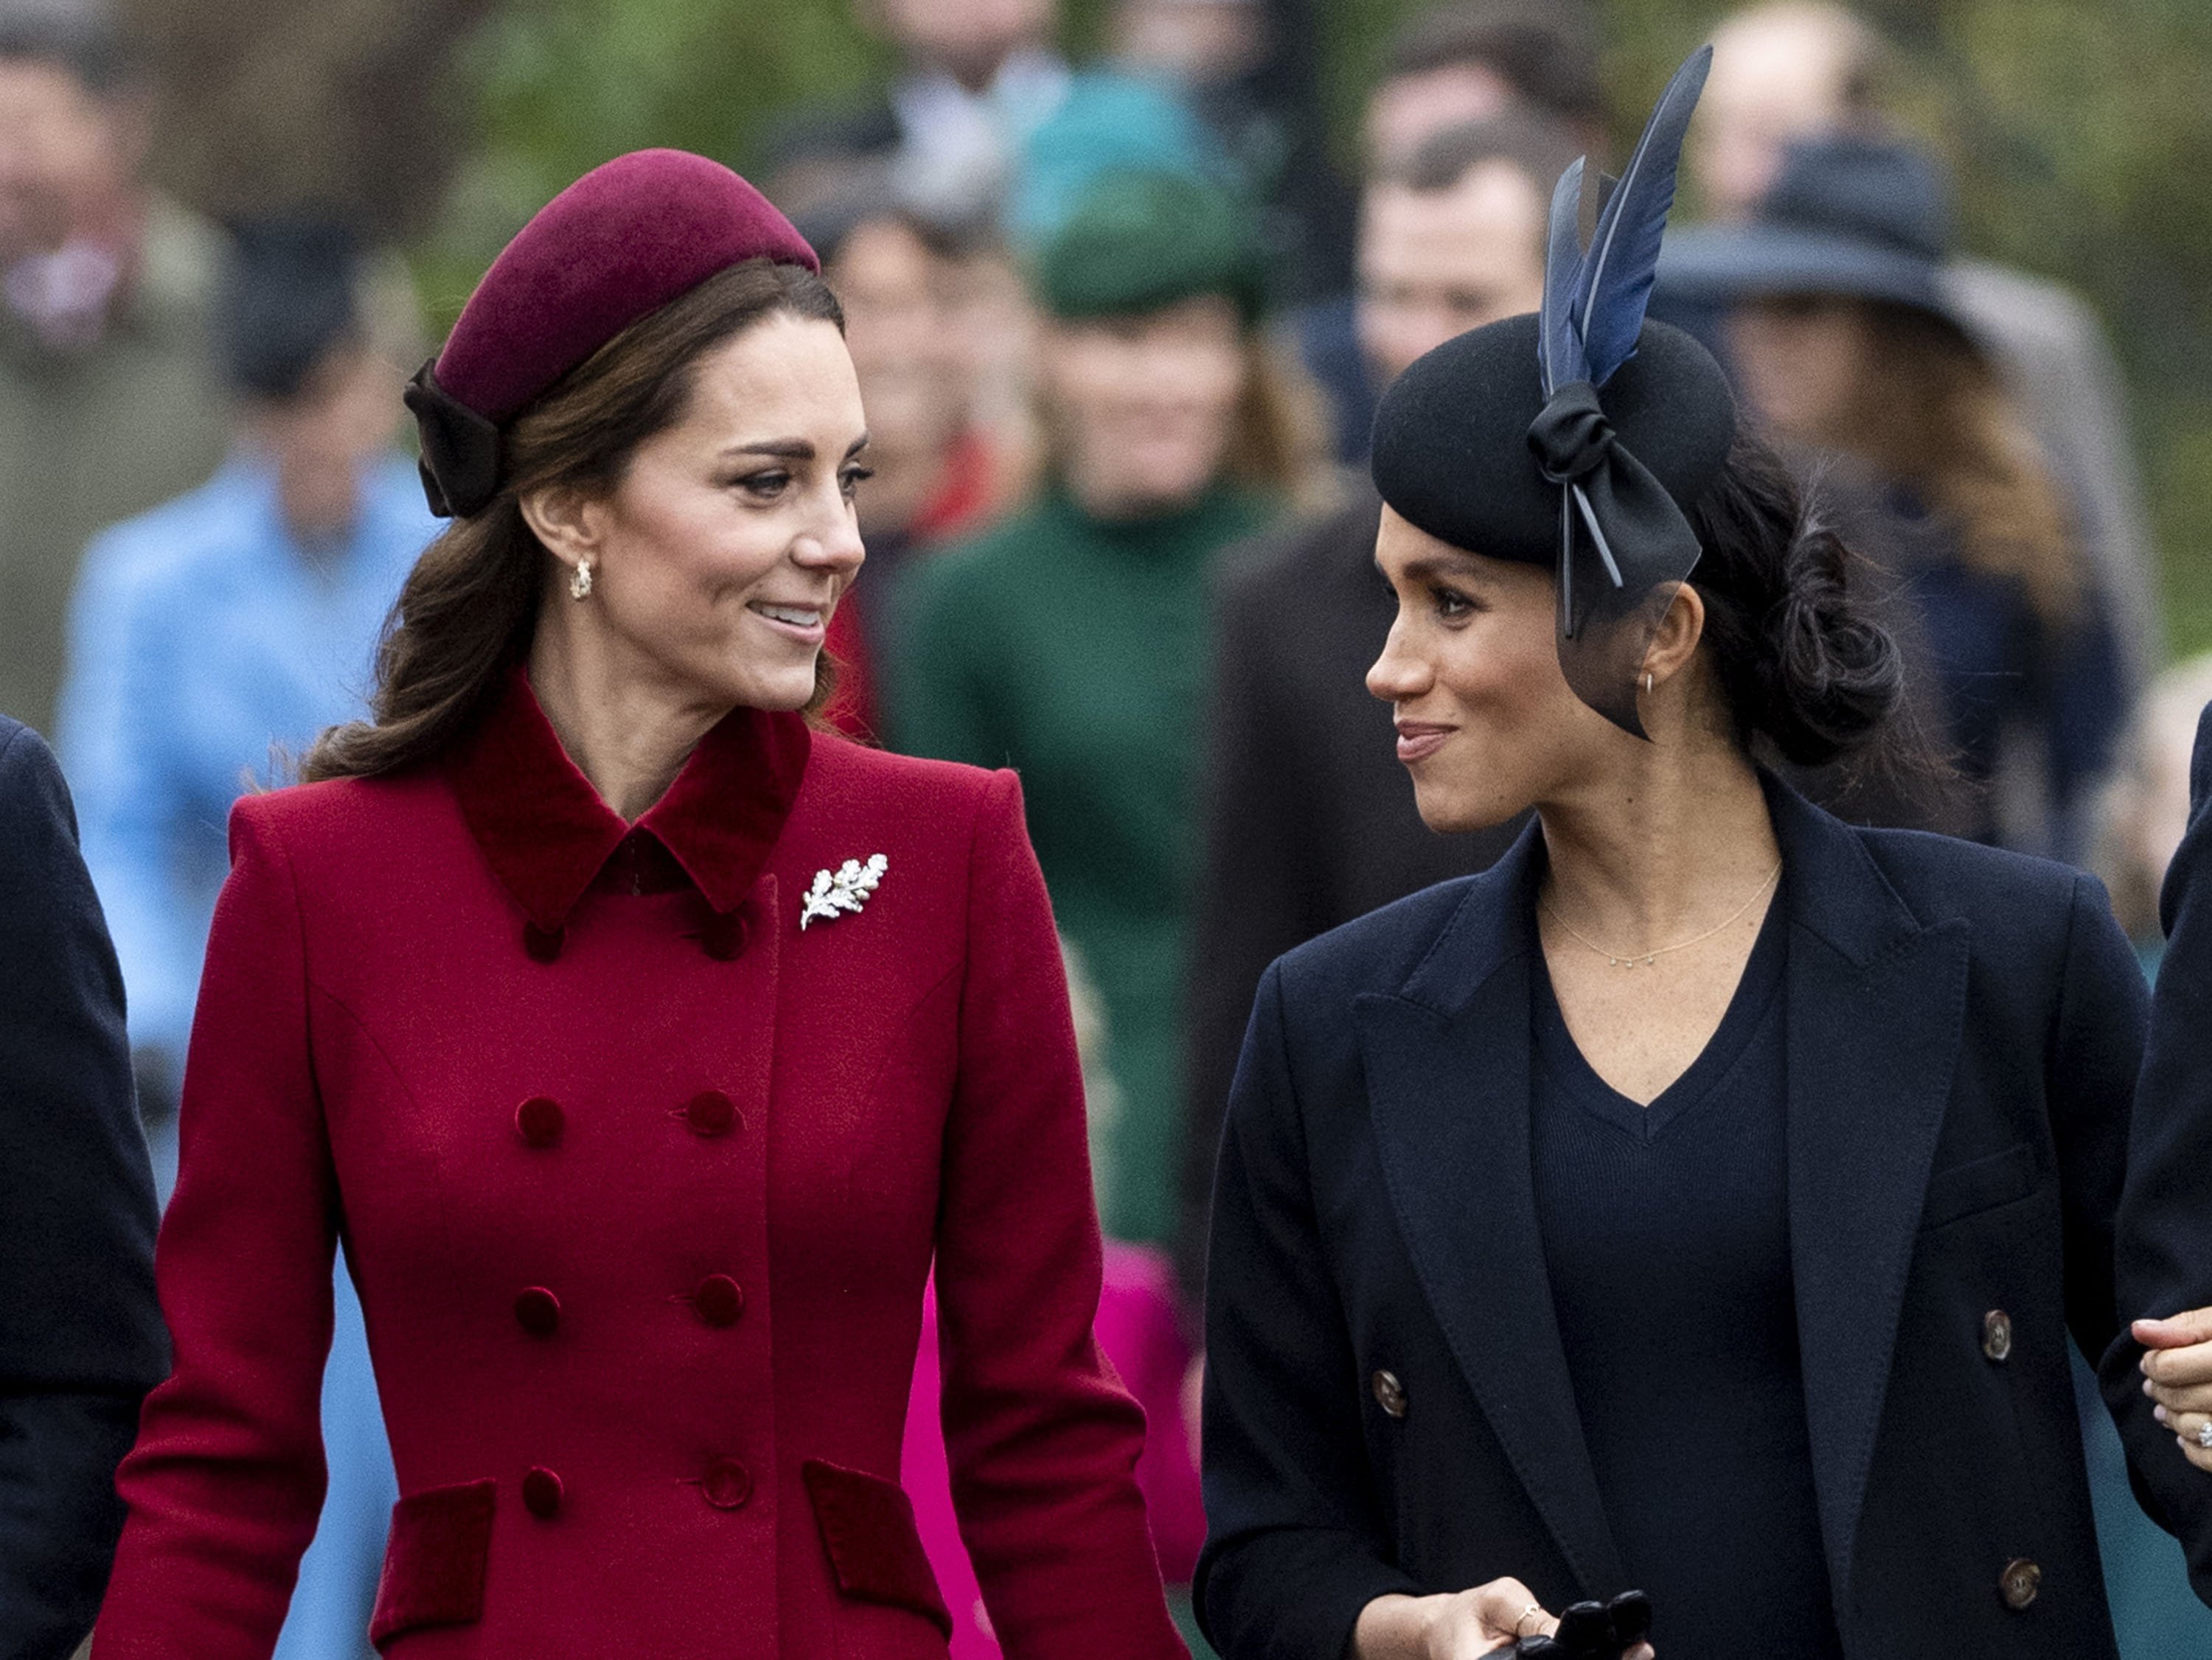 Kate Middleton, Duchess of Cambridge and Meghan Markle, Duchess of Sussex attending Christmas Day Church service at Church of St Mary Magdalene on the Sandringham estate on December 25, 2018 in King's Lynn, England. | Source: Getty Images